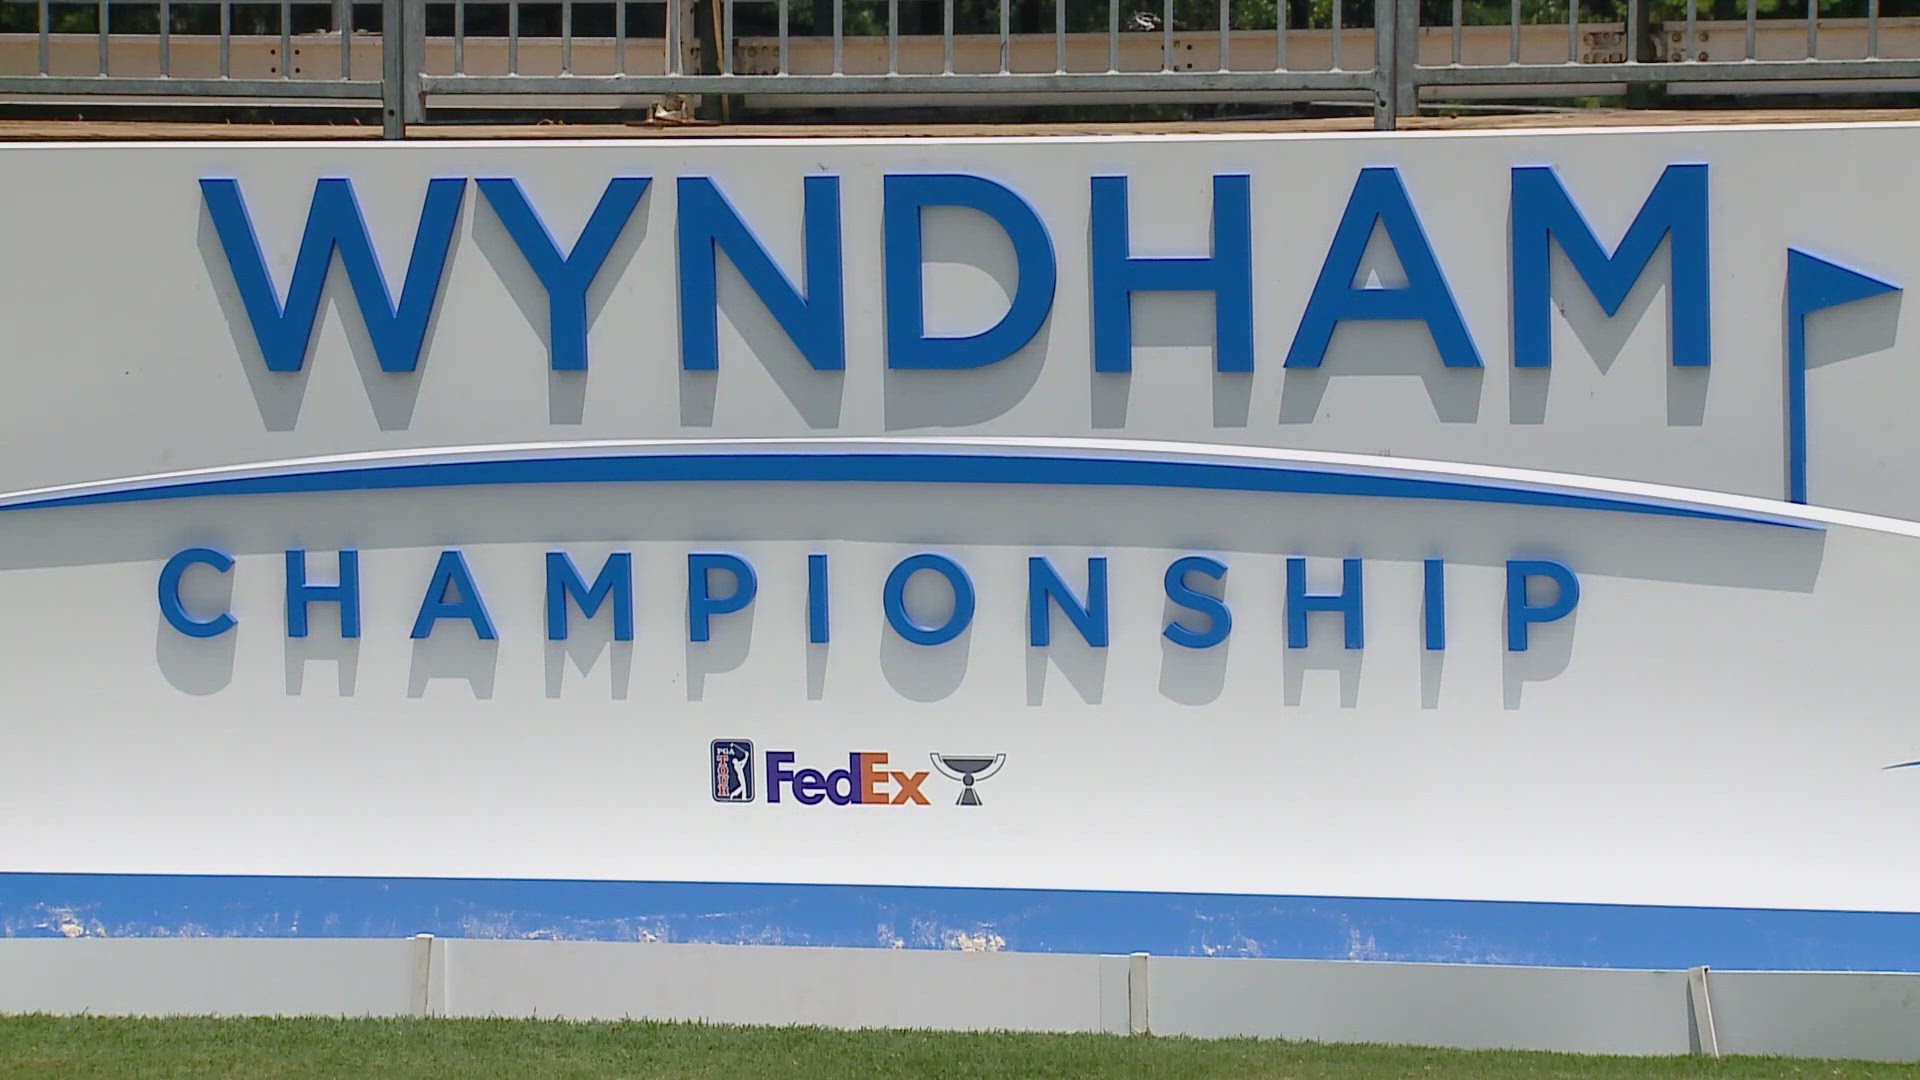 Crews ready as Wyndham Championship tee's off with ProAm